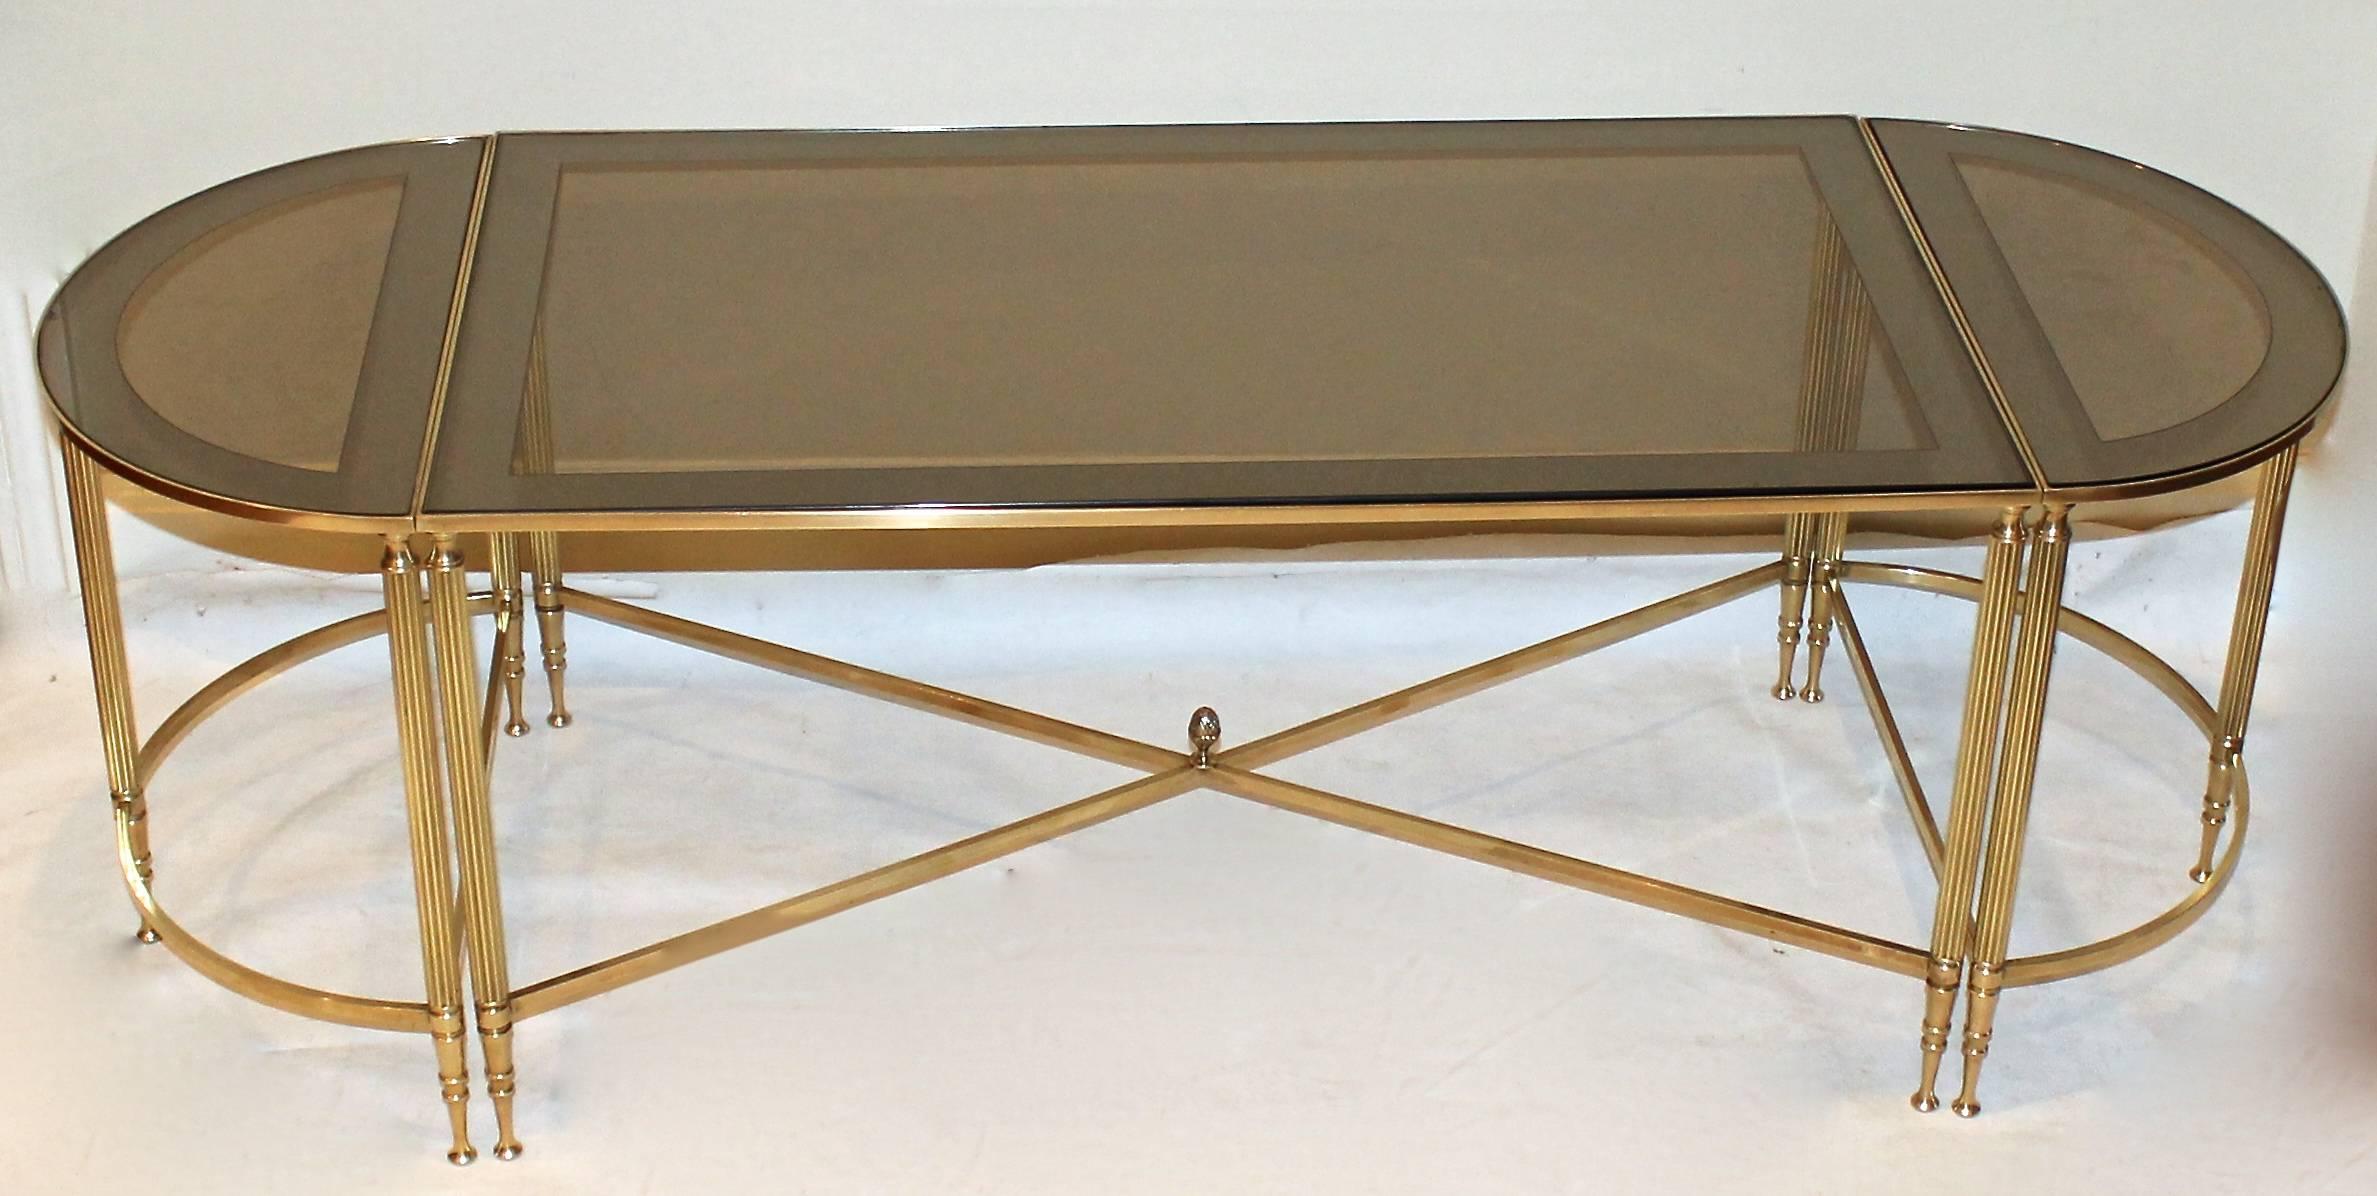 French Jansen Style Three-Piece Brass Cocktail Table In Excellent Condition For Sale In Dallas, TX